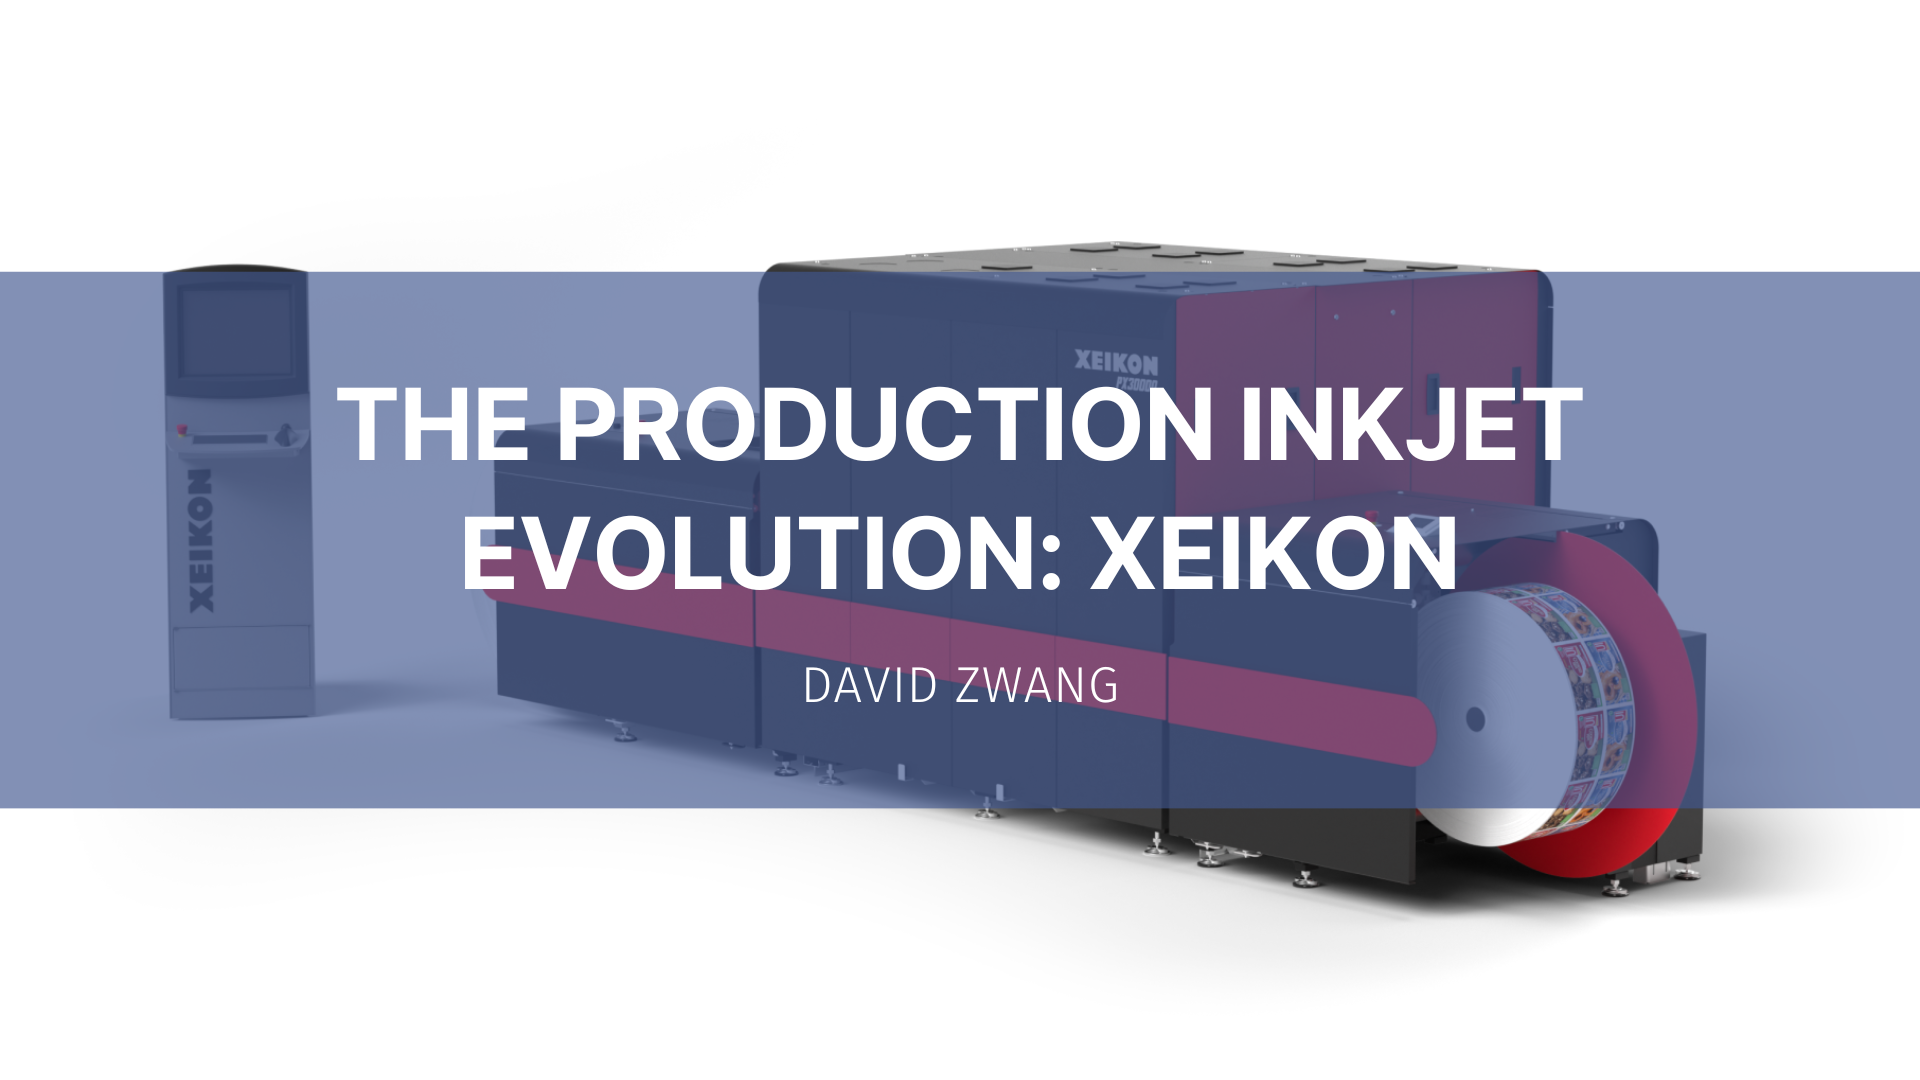 Featured image for “The Production Inkjet Evolution: Xeikon”